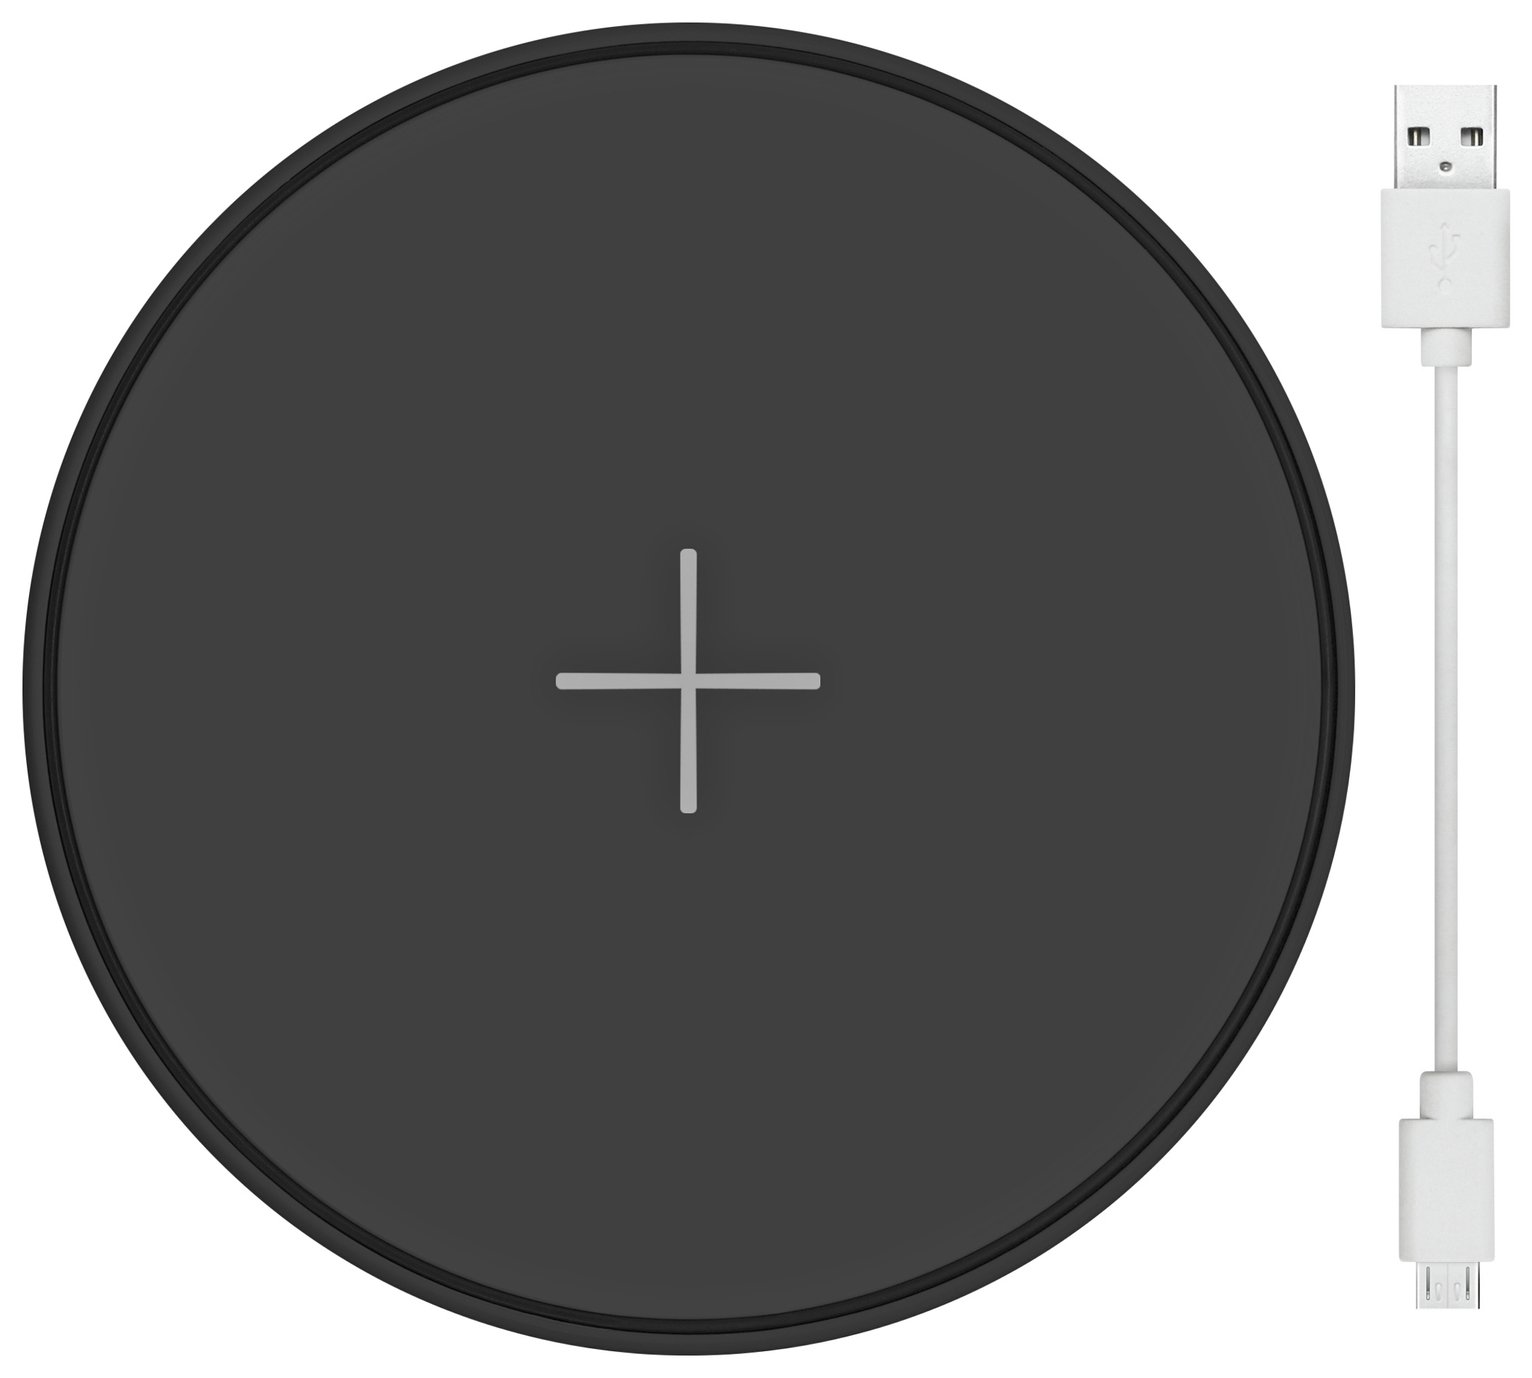 Juice Pad Qi Enabled 10W Wireless Charger - Black